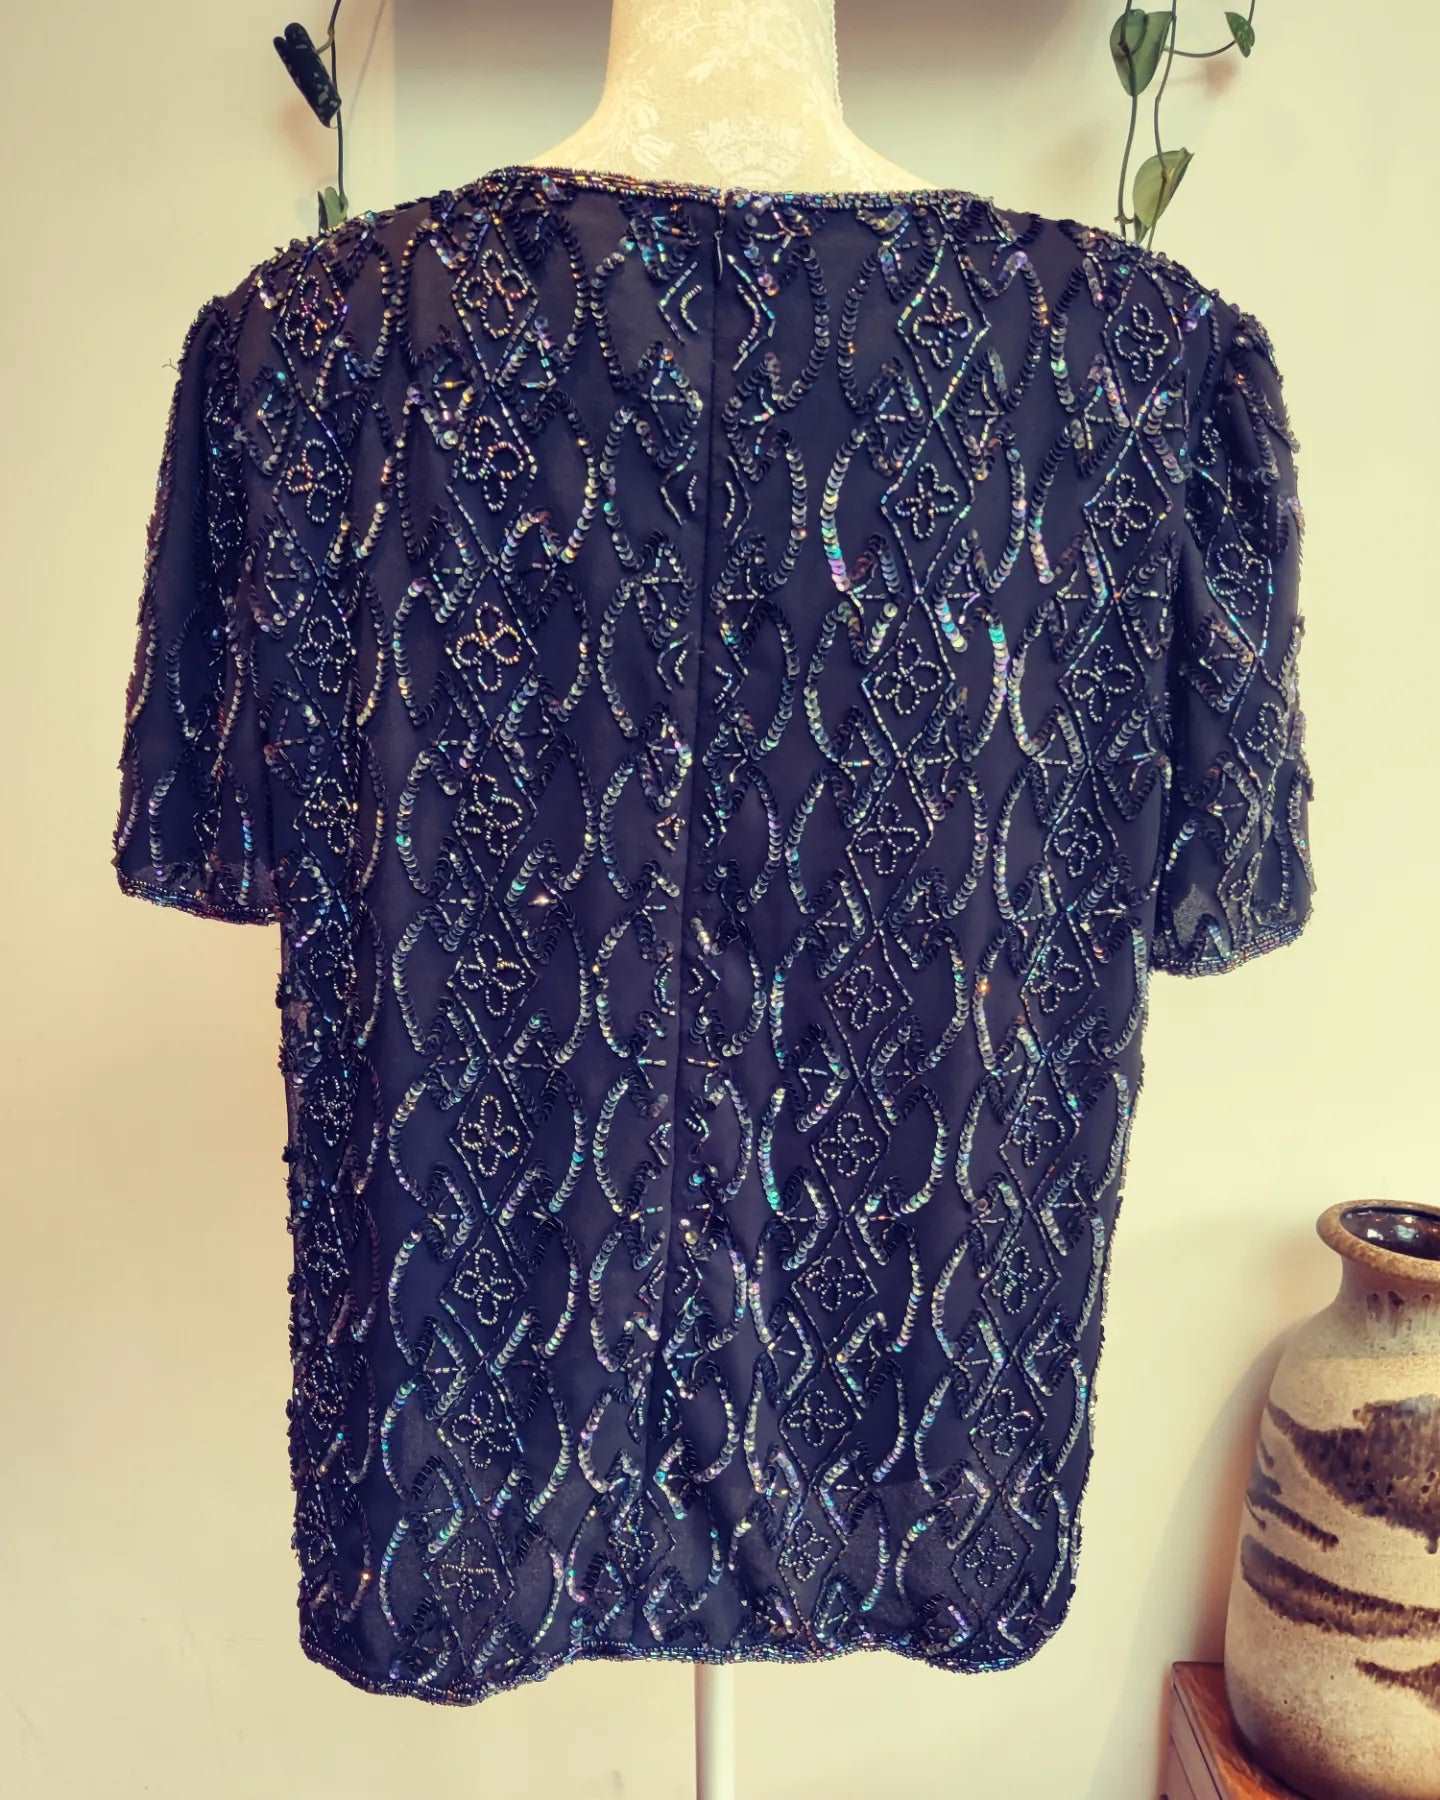 Stunning plus size vintage beaded top. Size 16-18